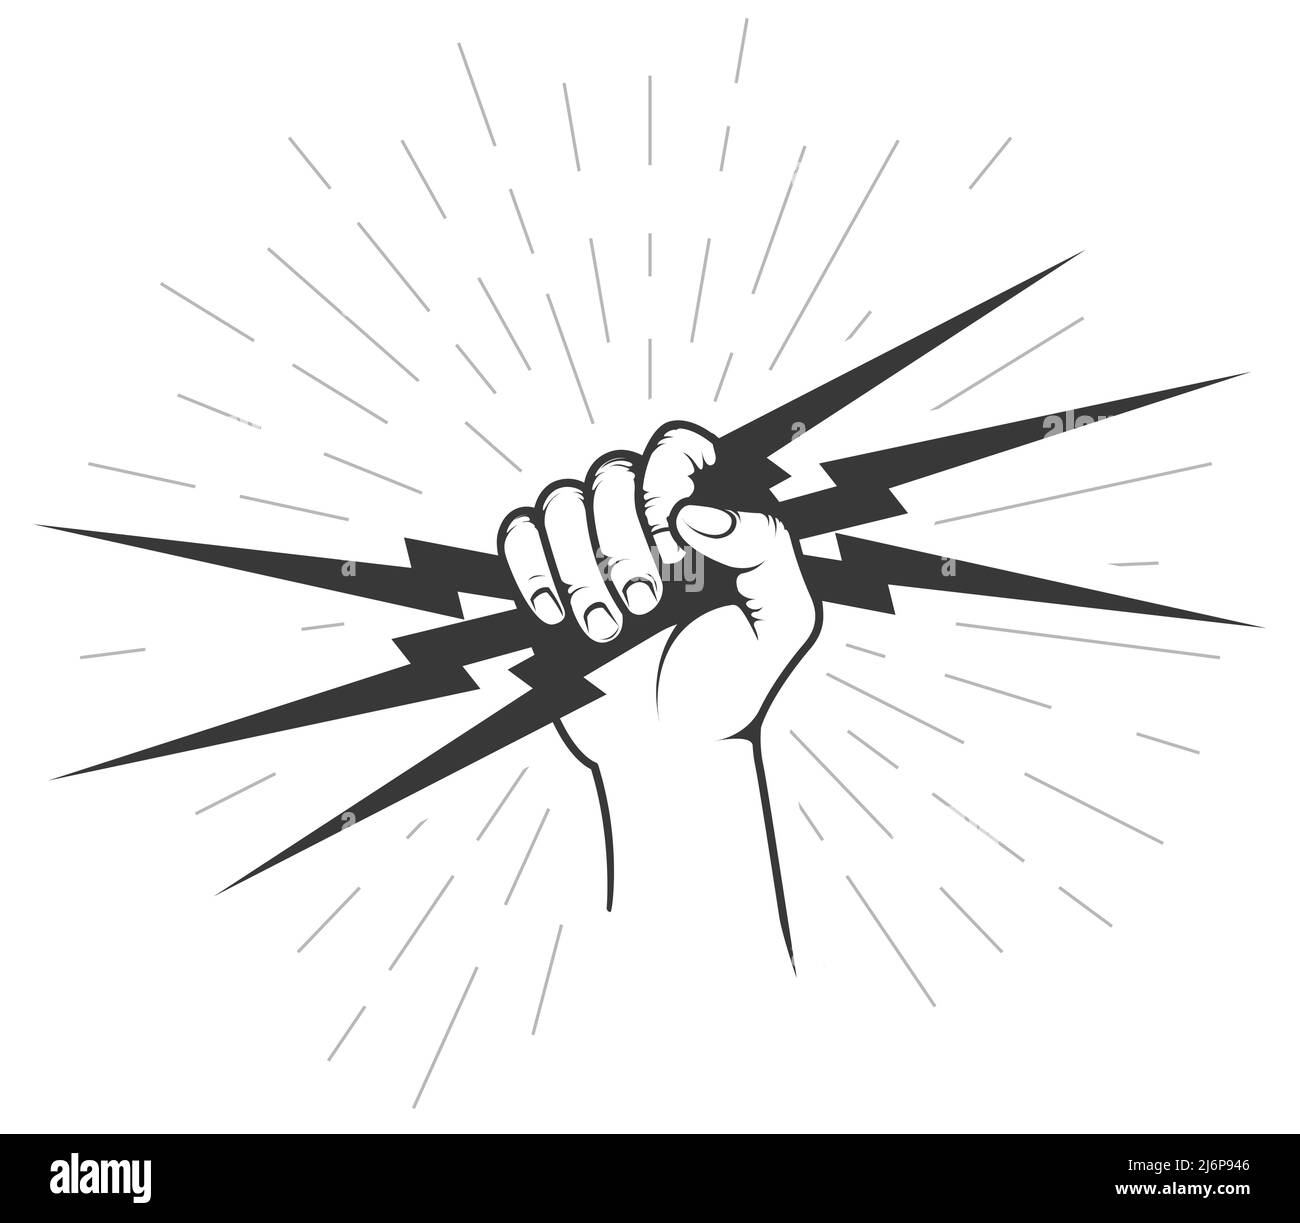 Hand holding a lighting bolt, electricity and power symbol, authority thunder sign, vector Stock Vector